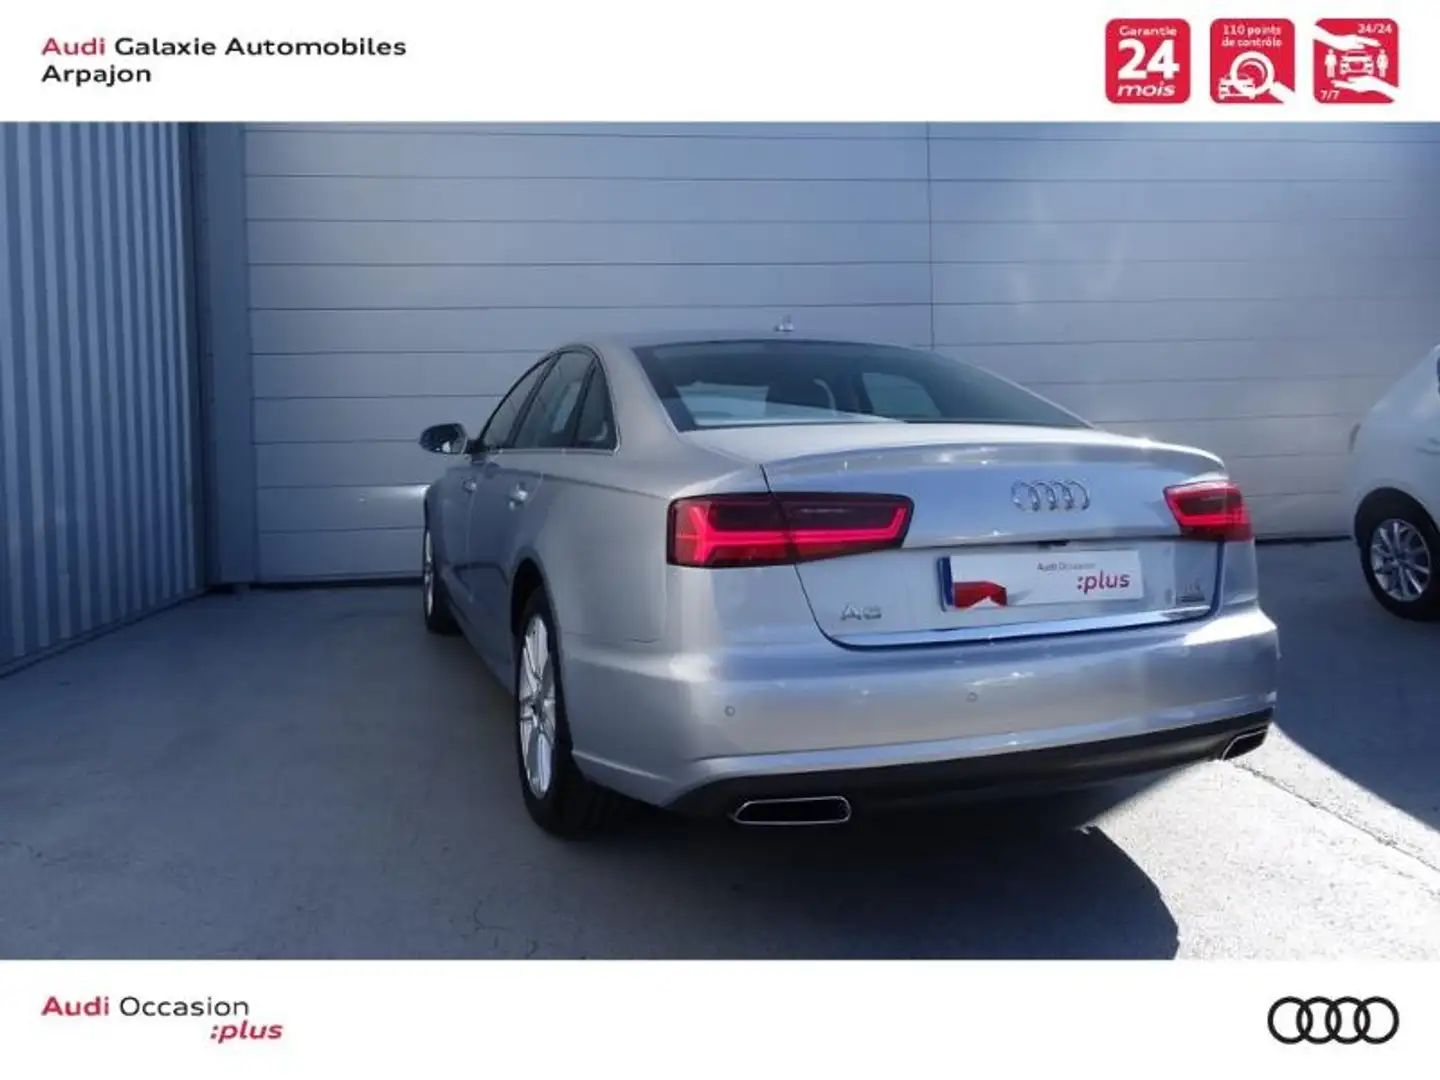 Audi A6 3.0 V6 TDI 272ch Ambition Luxe quattro S tronic 7 Gris - 2